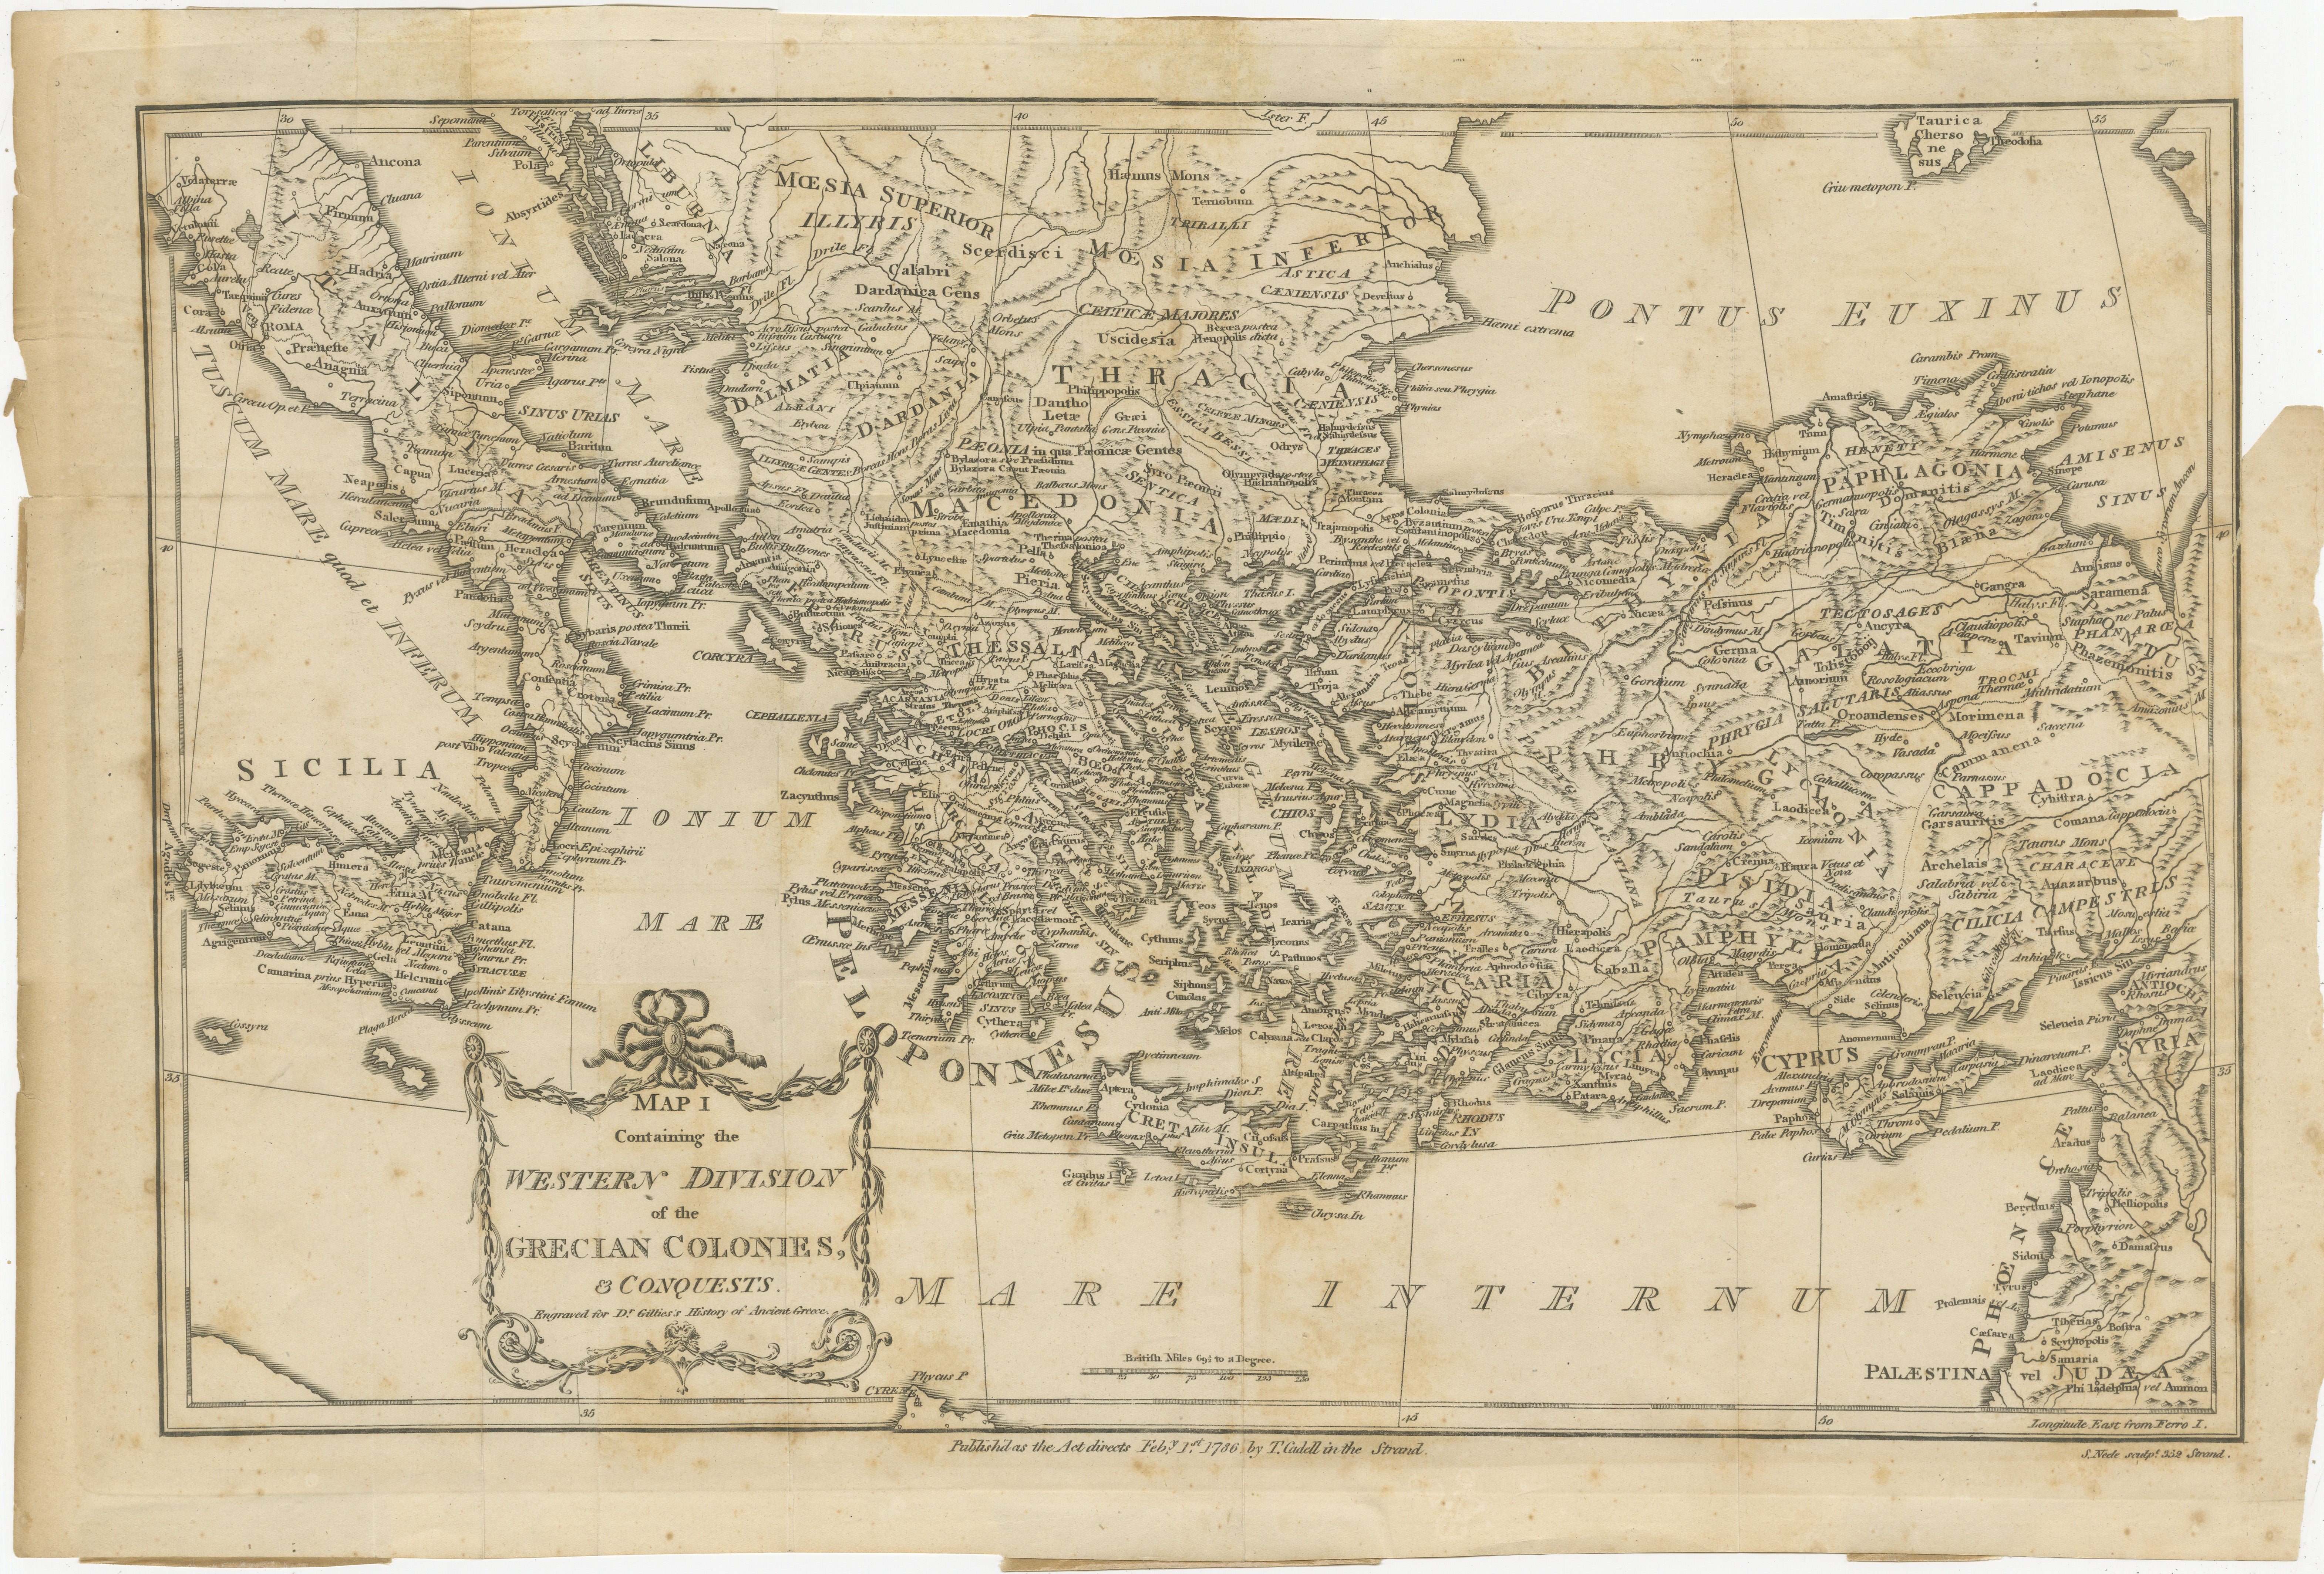 Antique map titled 'Map I containing the Western Division of the Grecian Colonies & Conquests'. Original antique map of the ancient Greek colonization. Frontispiece map of 'The History of Ancient Greece, Its Colonies, and Conquests
From the Earliest